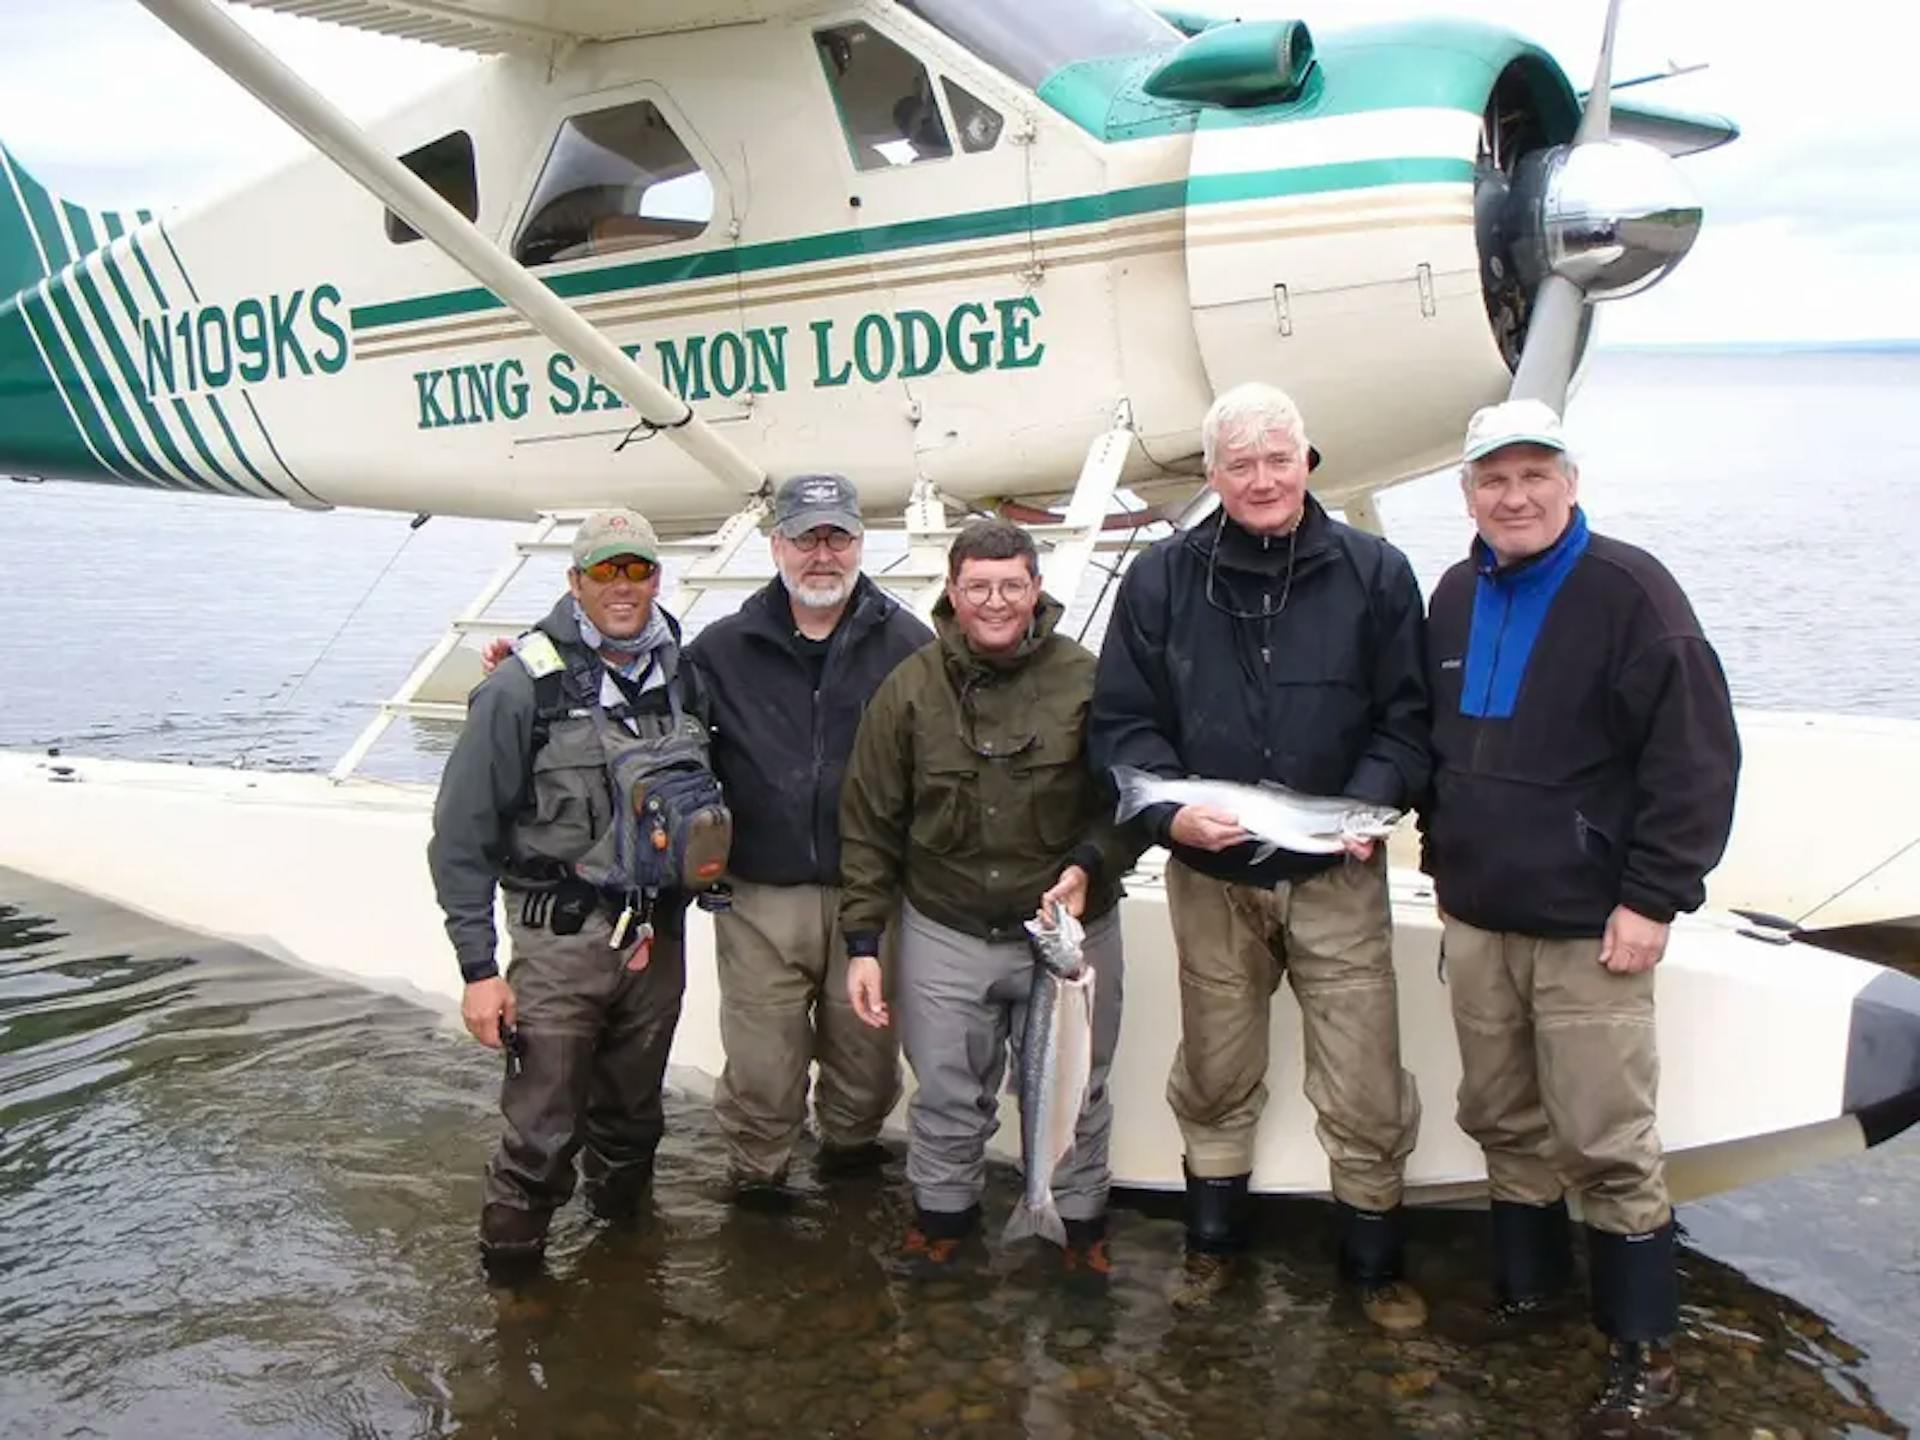 Leonard Leo, center, on the 2008 fishing trip with a guide and other guests. Leo attended and helped organize the Alaska fishing vacation. Credit: Photo obtained by ProPublica